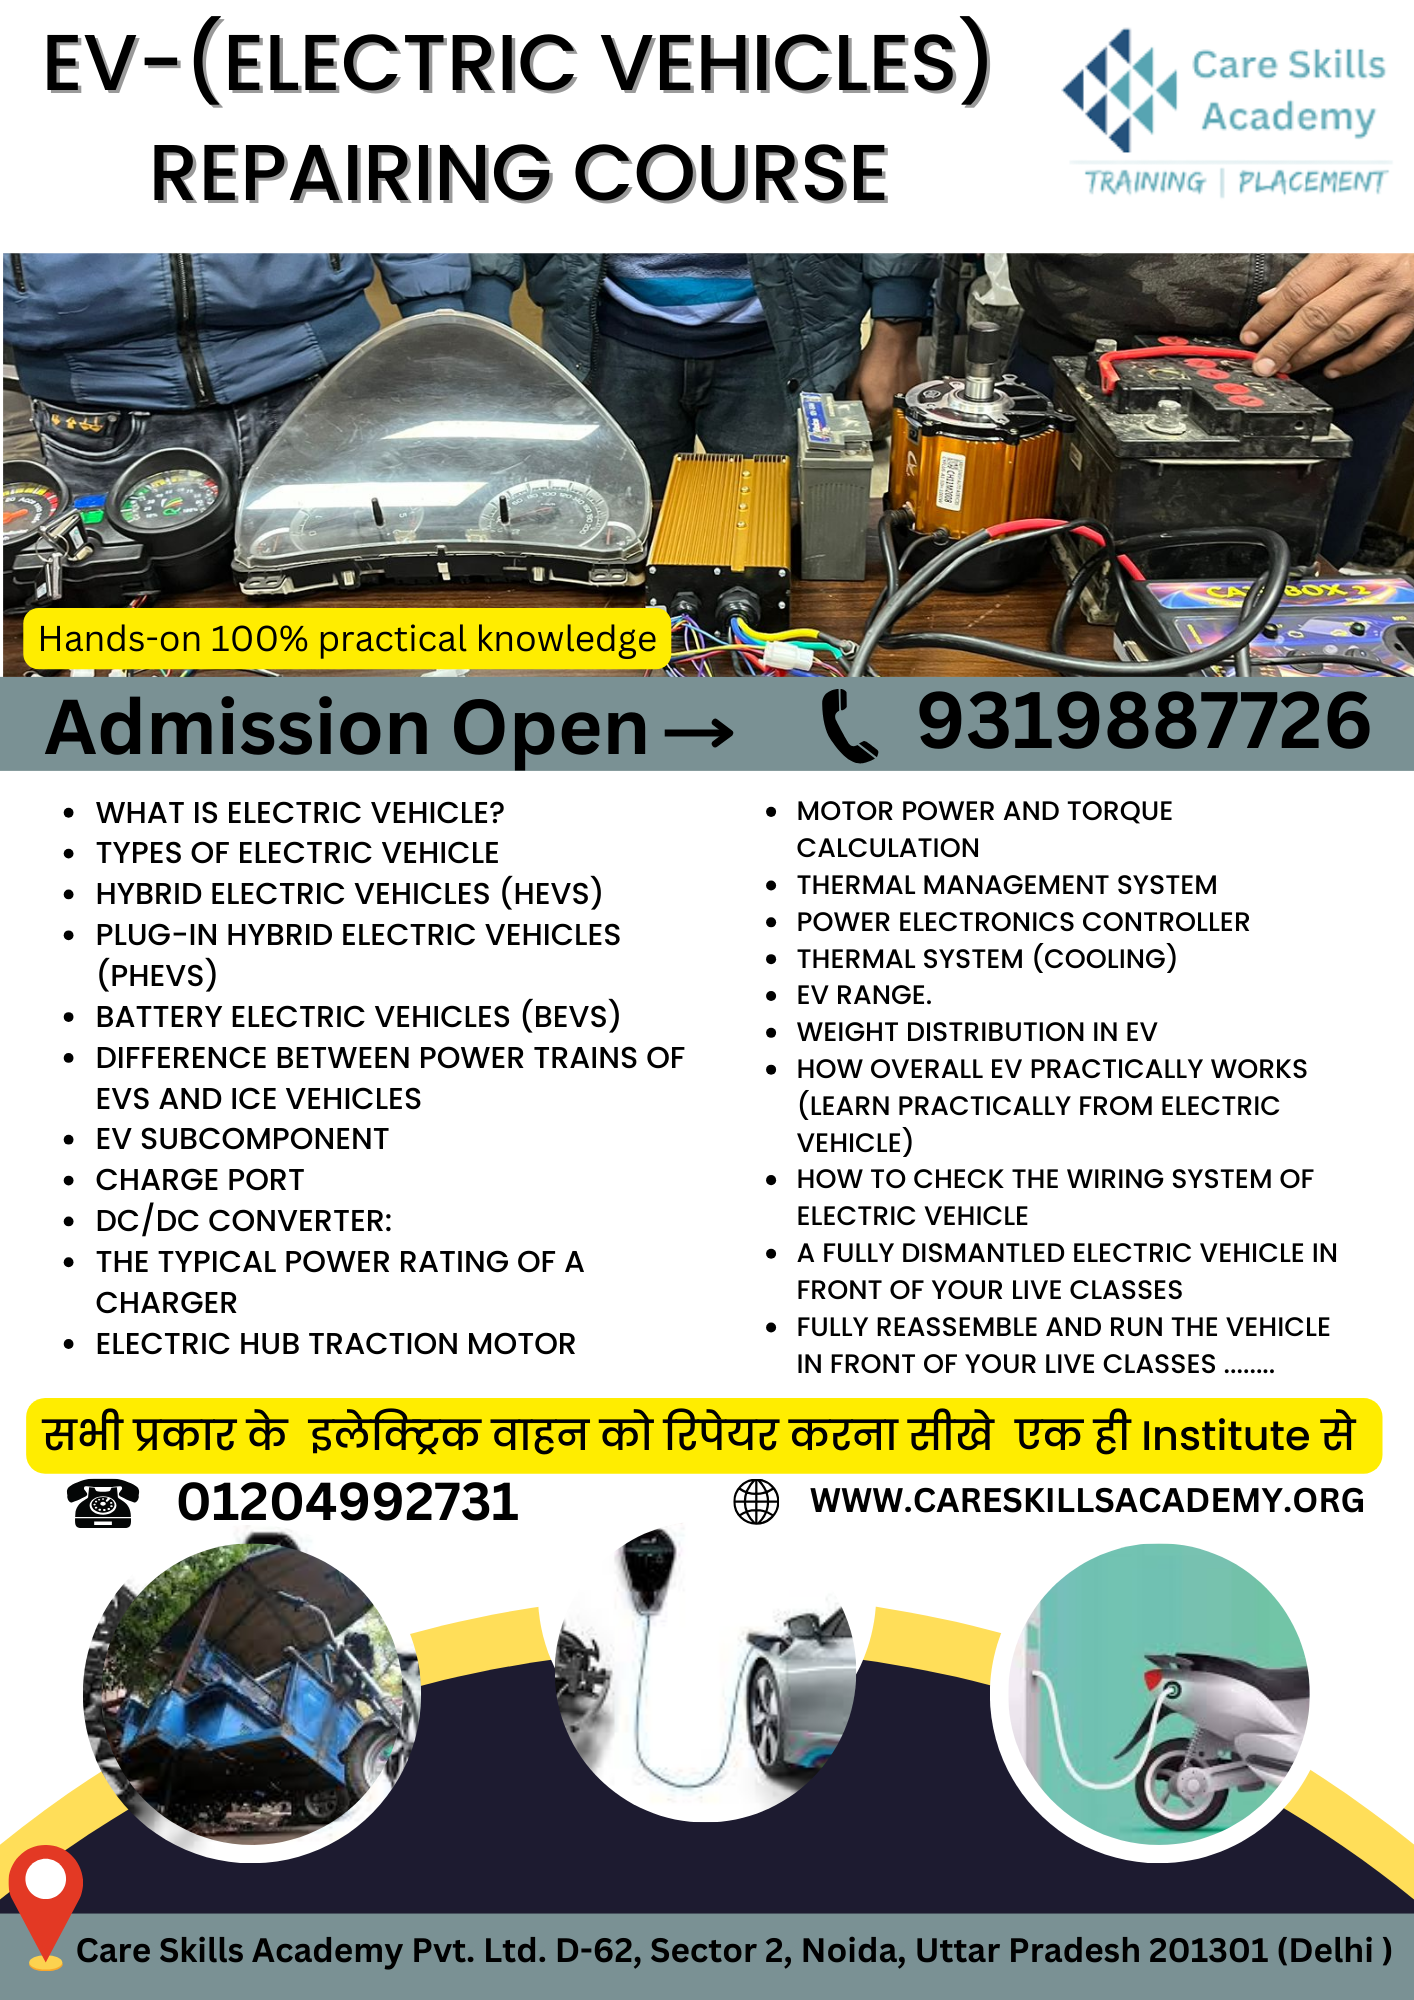 EV-(Electric Vehicles) Repairing Course in Delhi at Care Skills Academy